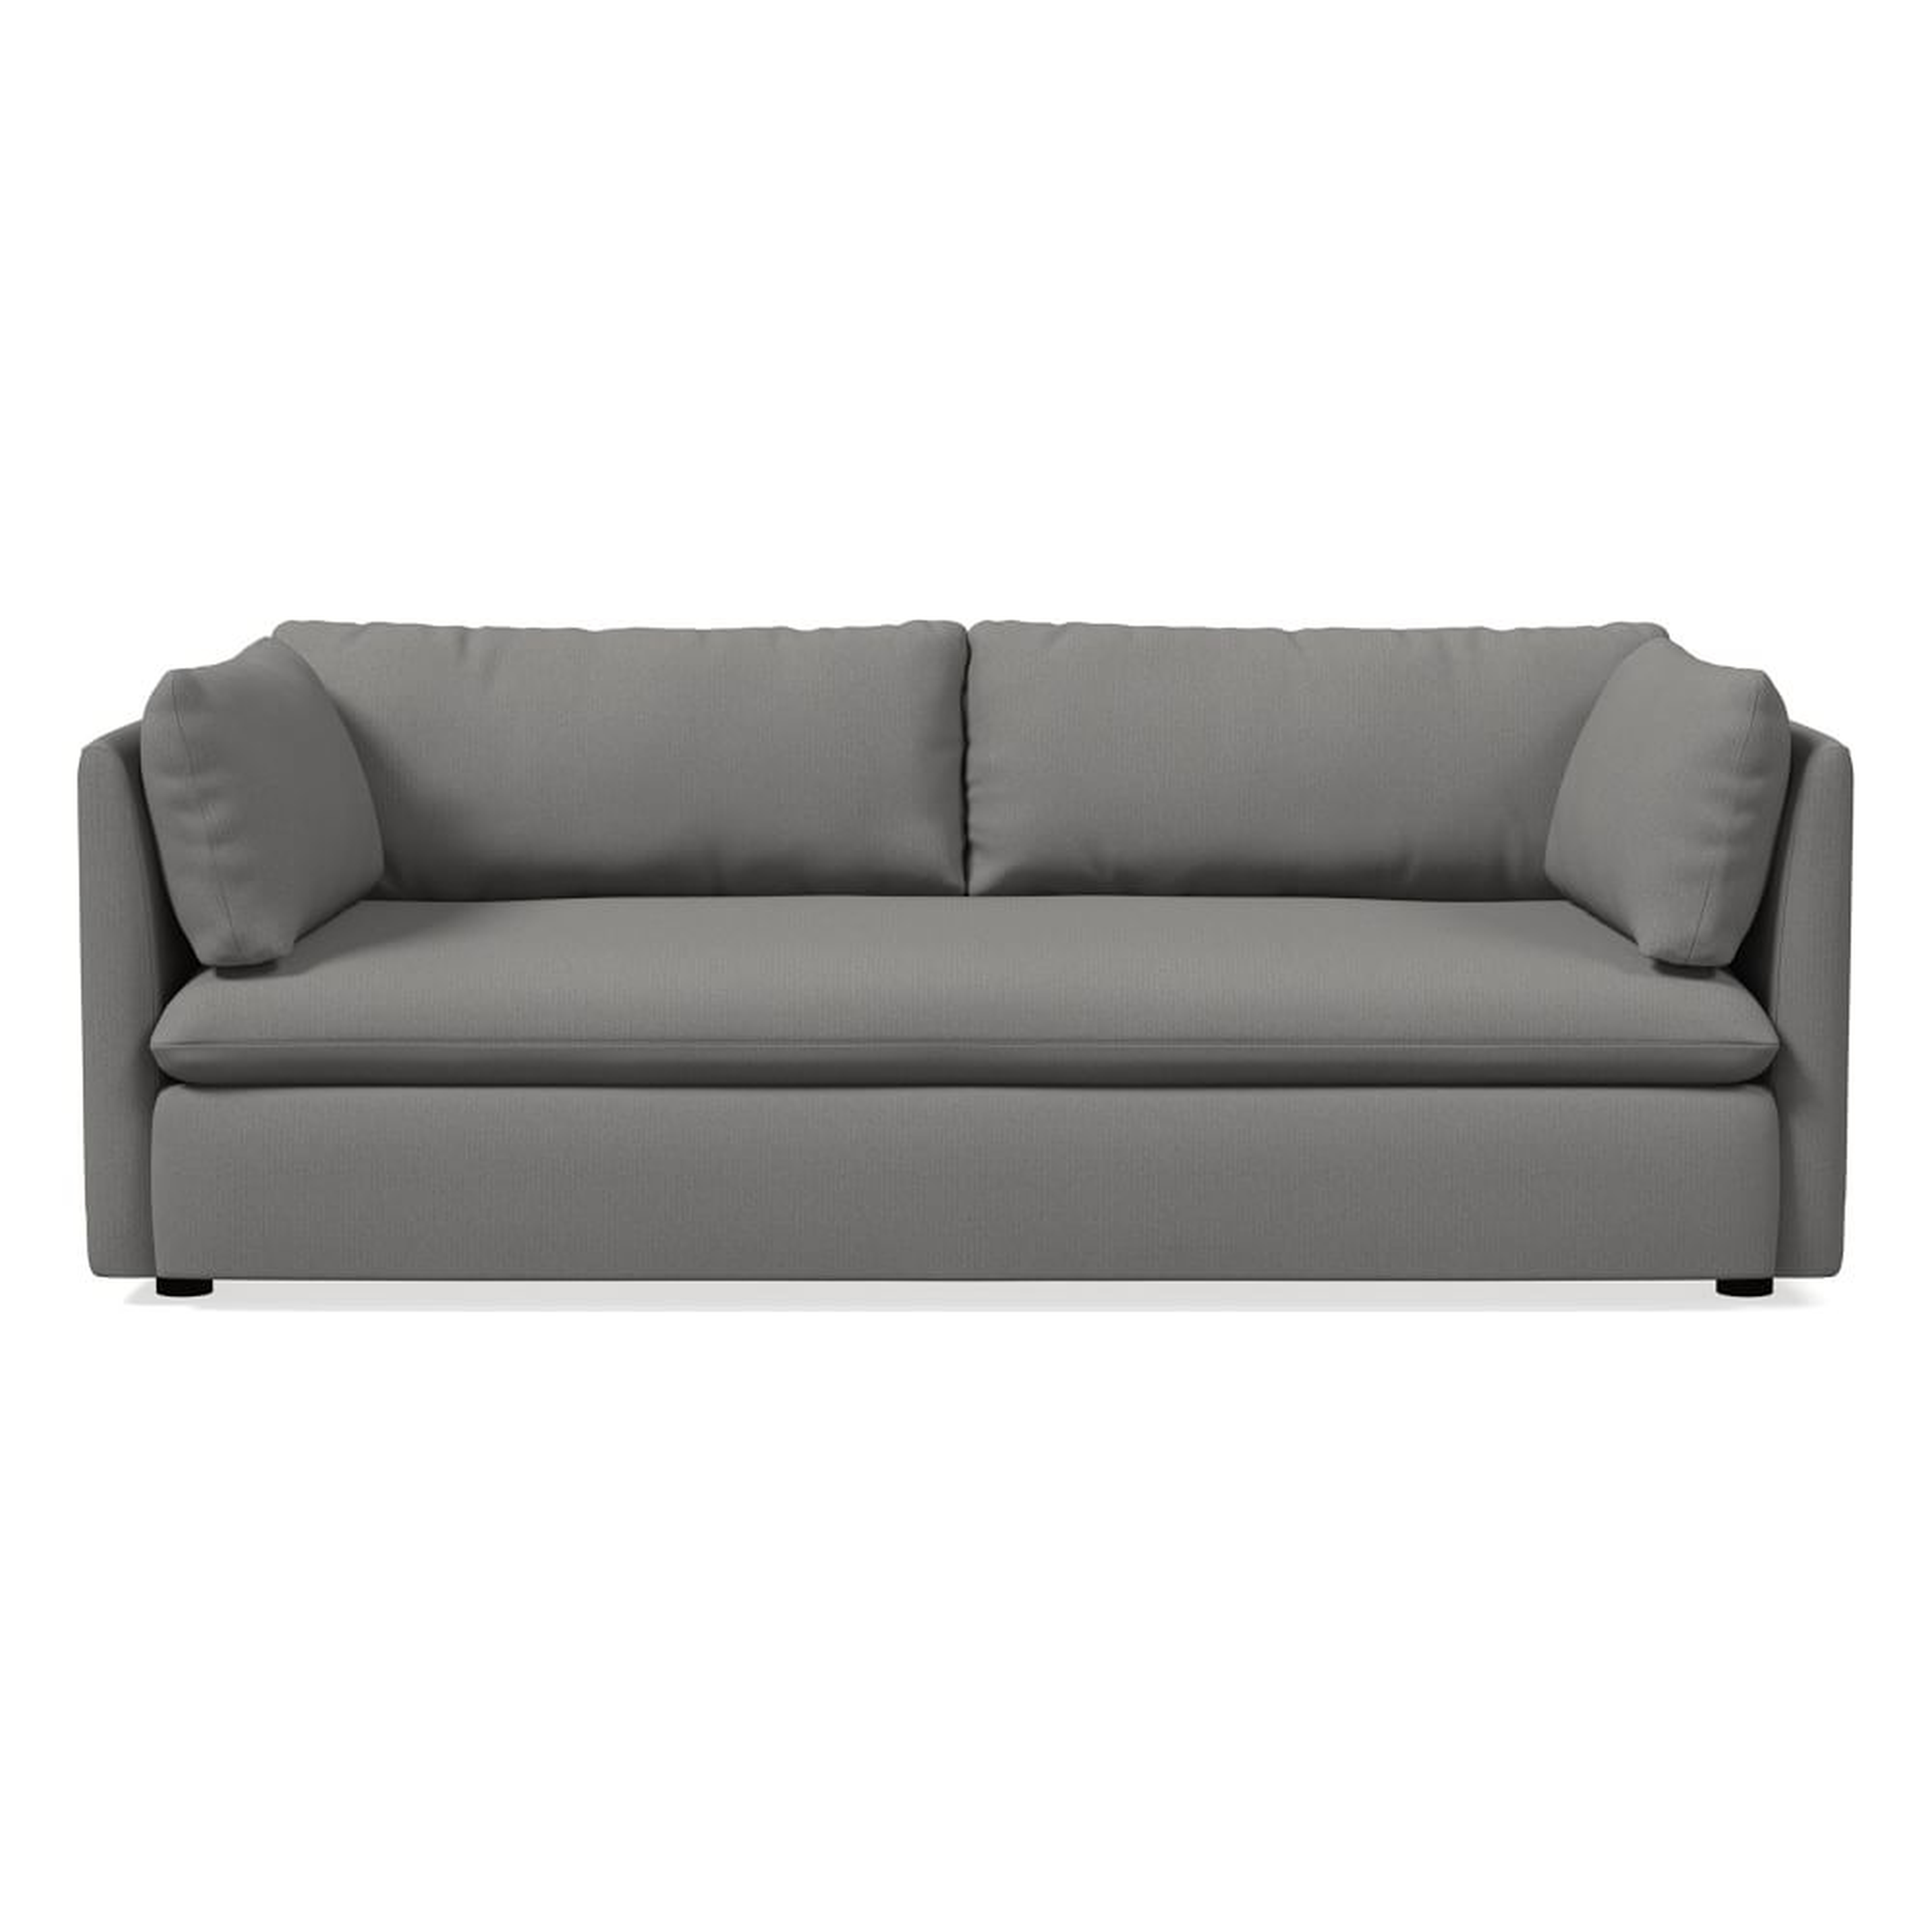 Shelter 84" Sofa, Performance Washed Canvas, Storm Gray - West Elm